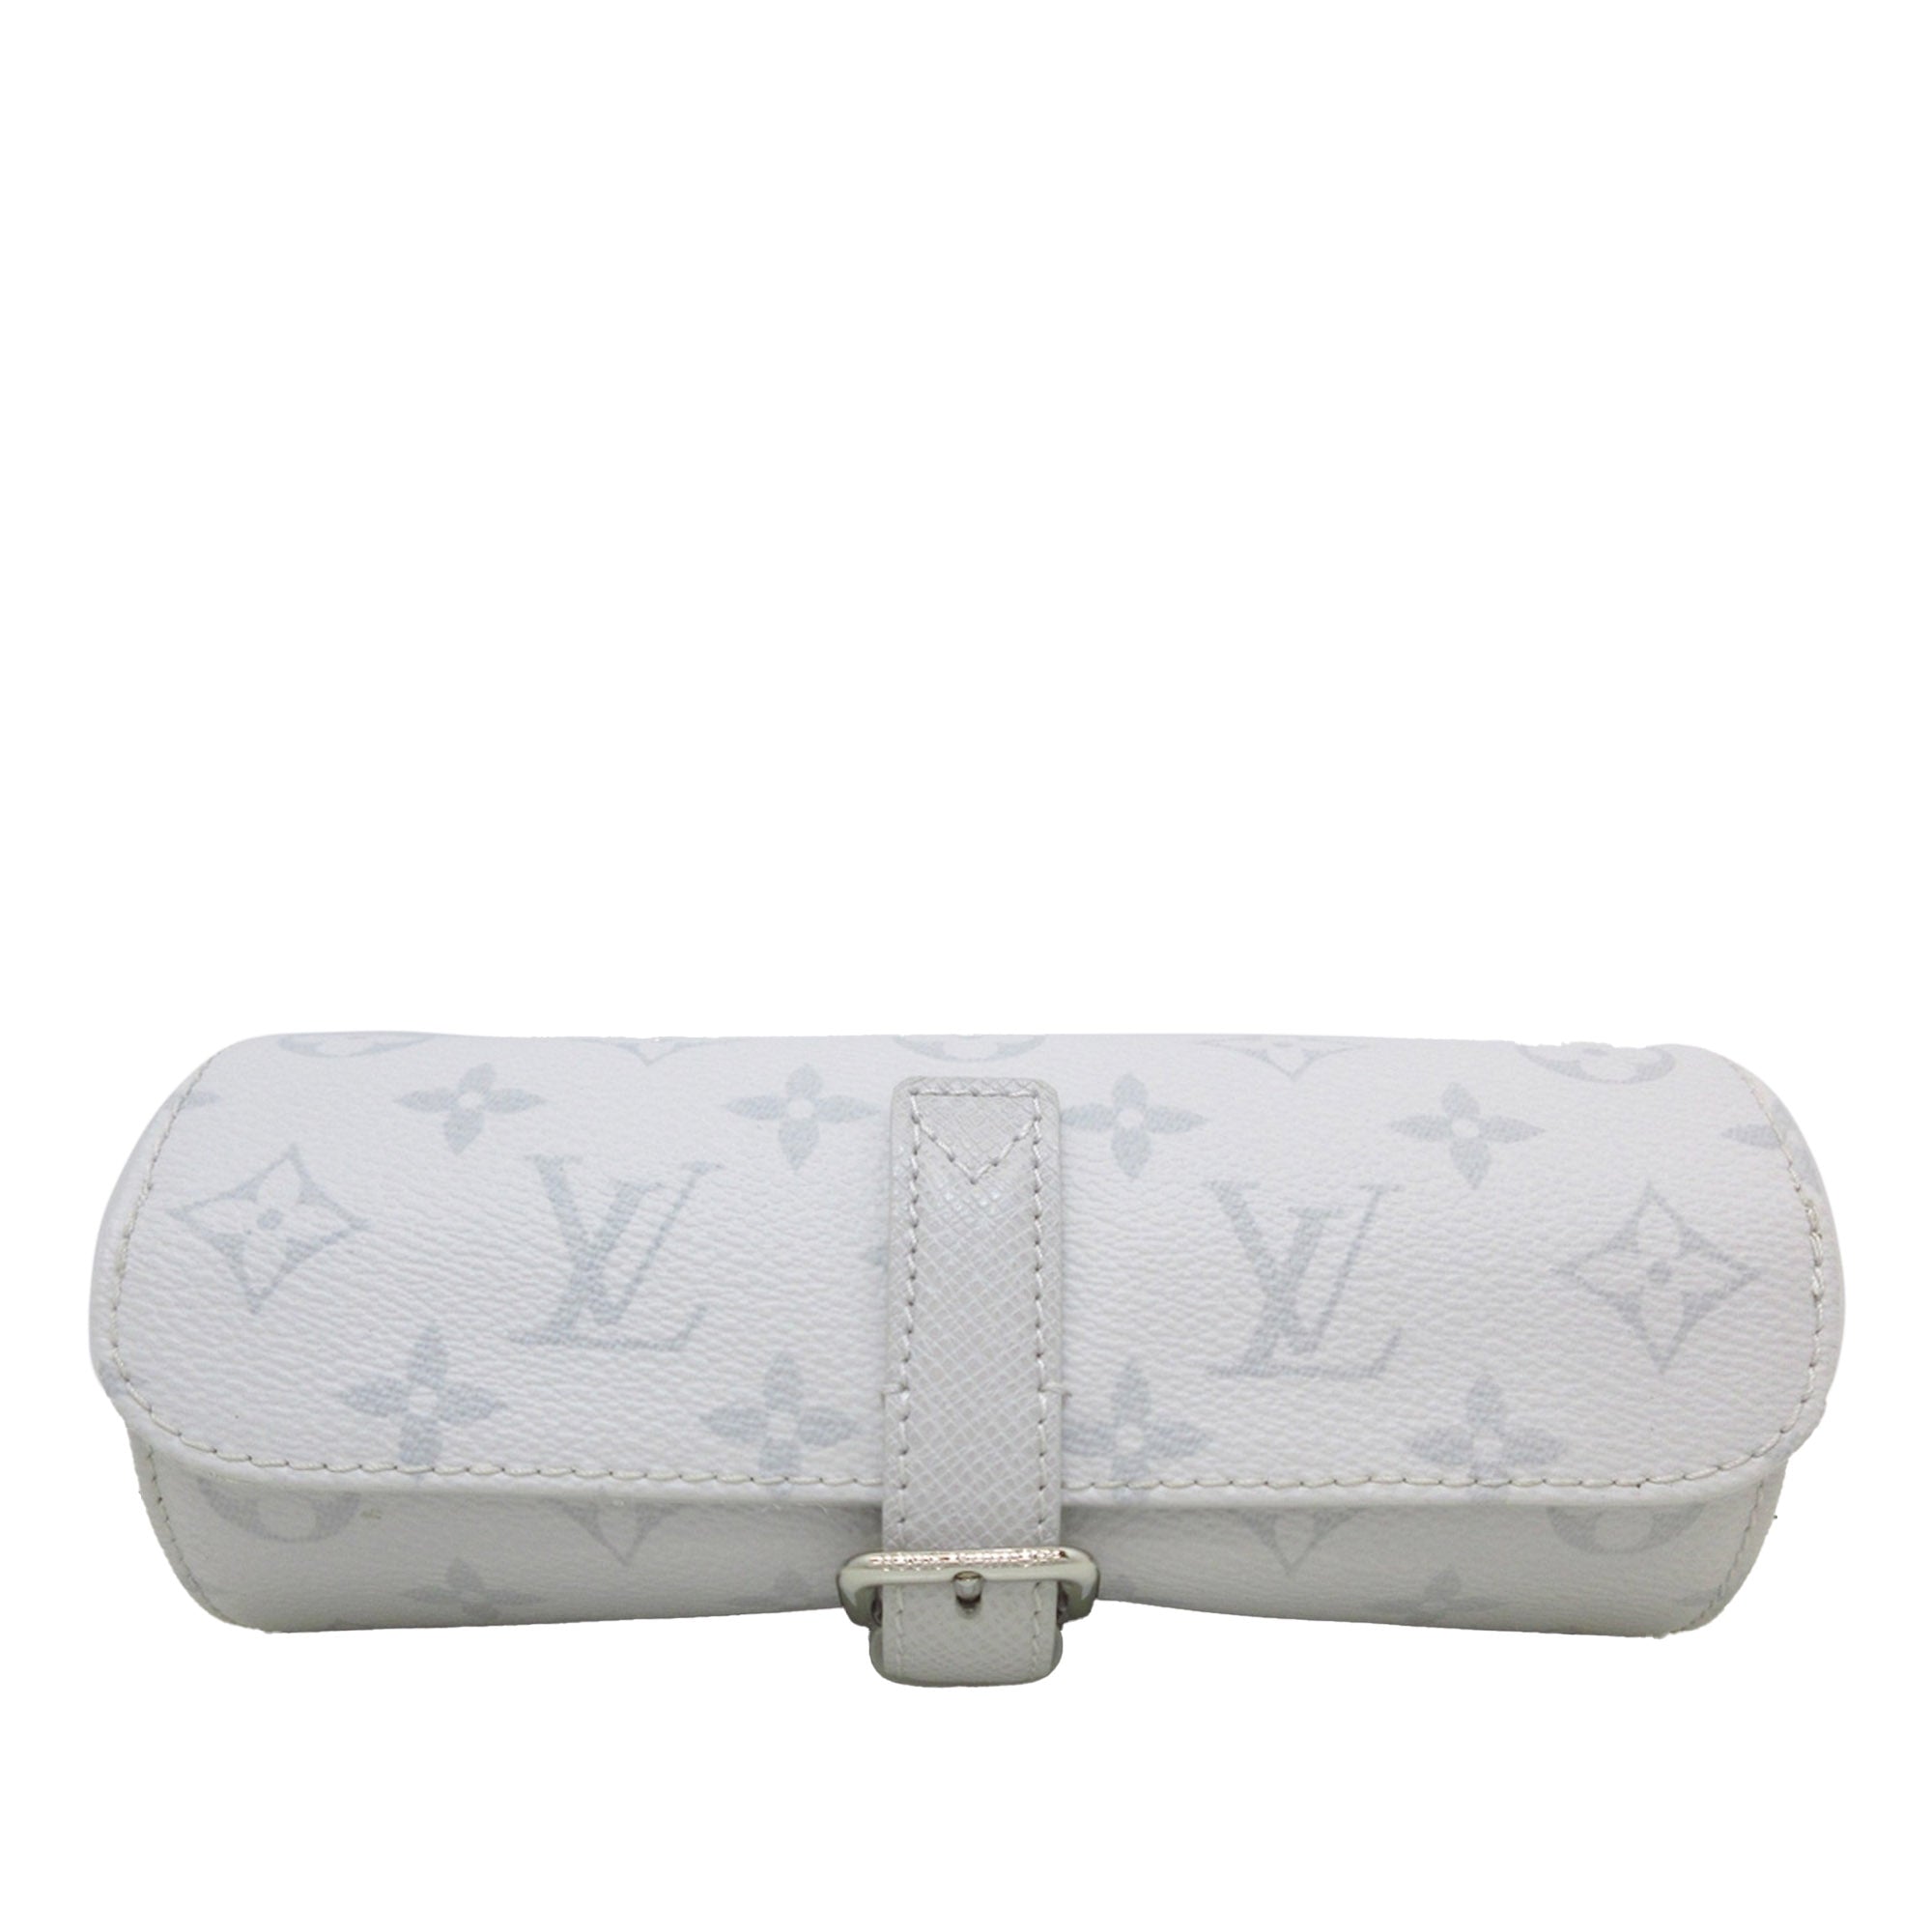 LV White Leather - Goes with everything <3